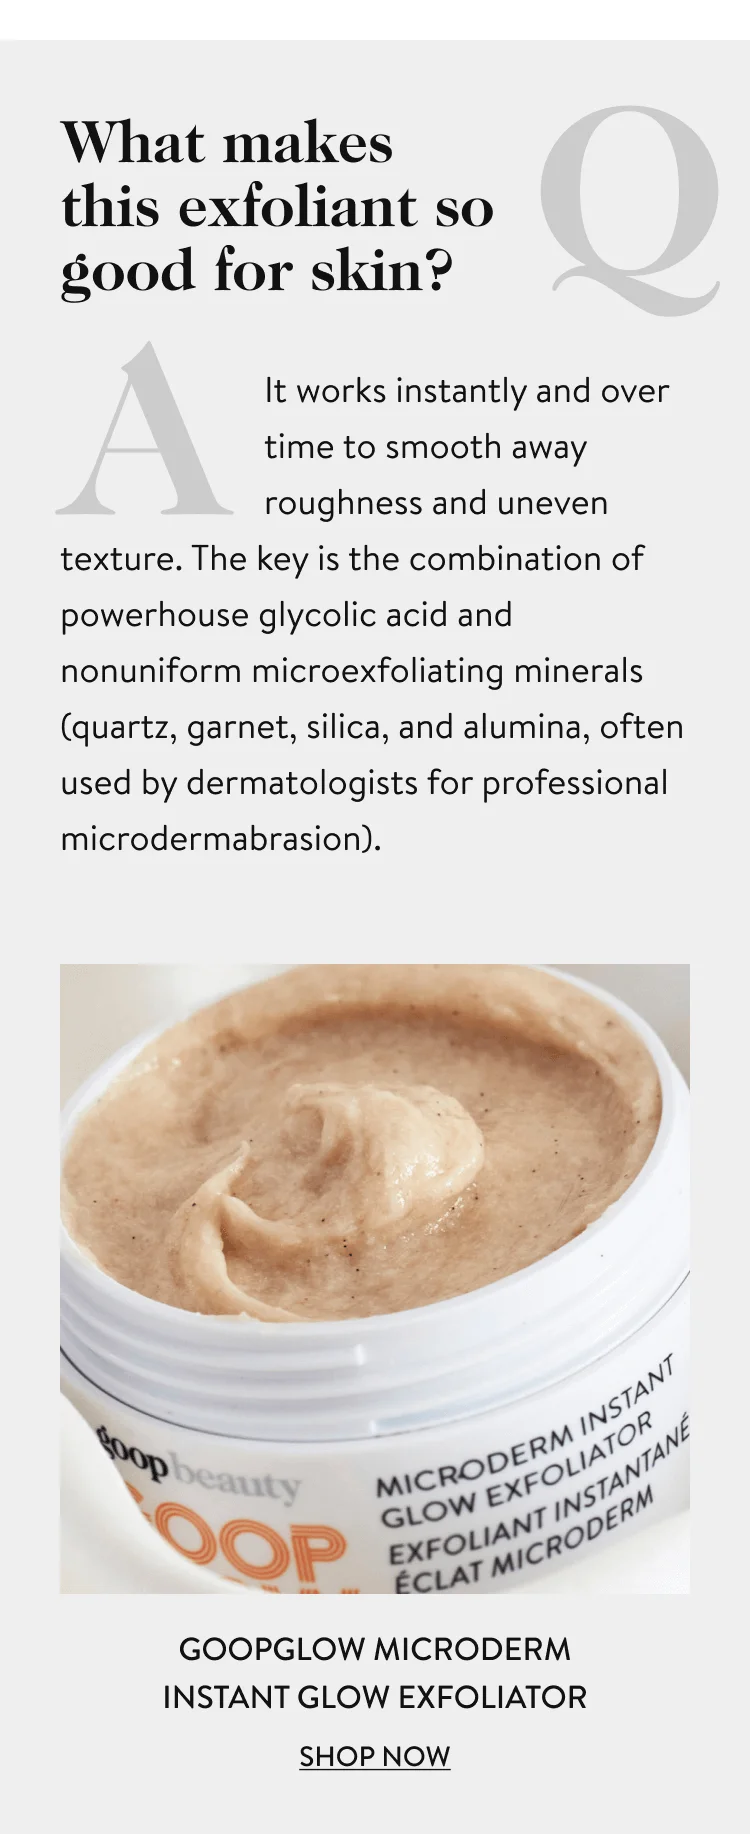 What makes this exfoliant good for skin?